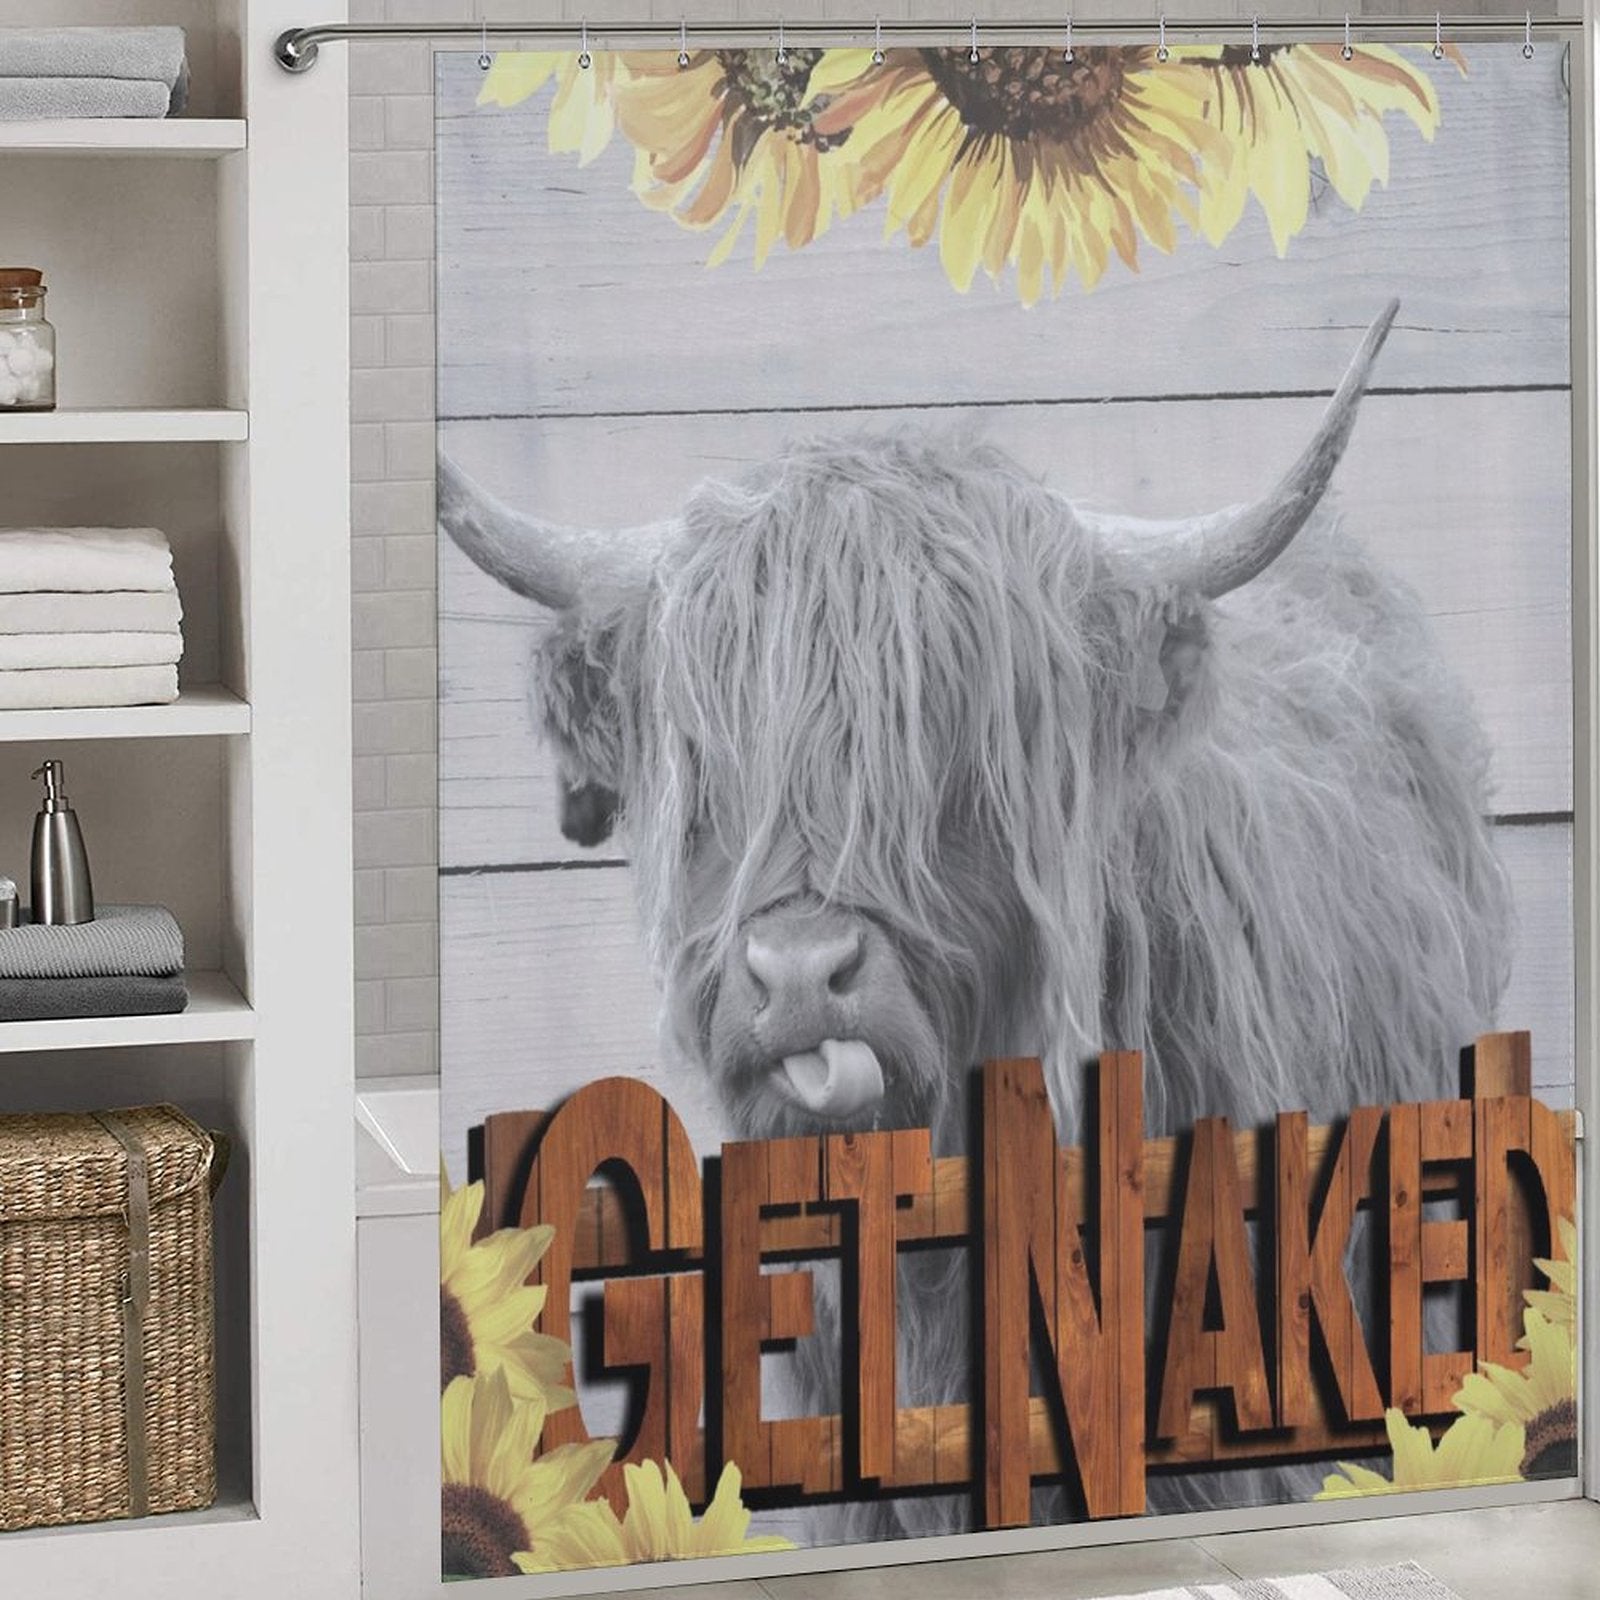 The Highland Cow Sunflowers Get Naked Shower Curtain-Cottoncat by Cotton Cat features a picture of a Scottish Highland cow and the words "GET NAKED" in large wooden letters, surrounded by vibrant sunflowers. Towels and shelves are visible on the left, adding a touch of rustic charm to your bathroom décor.